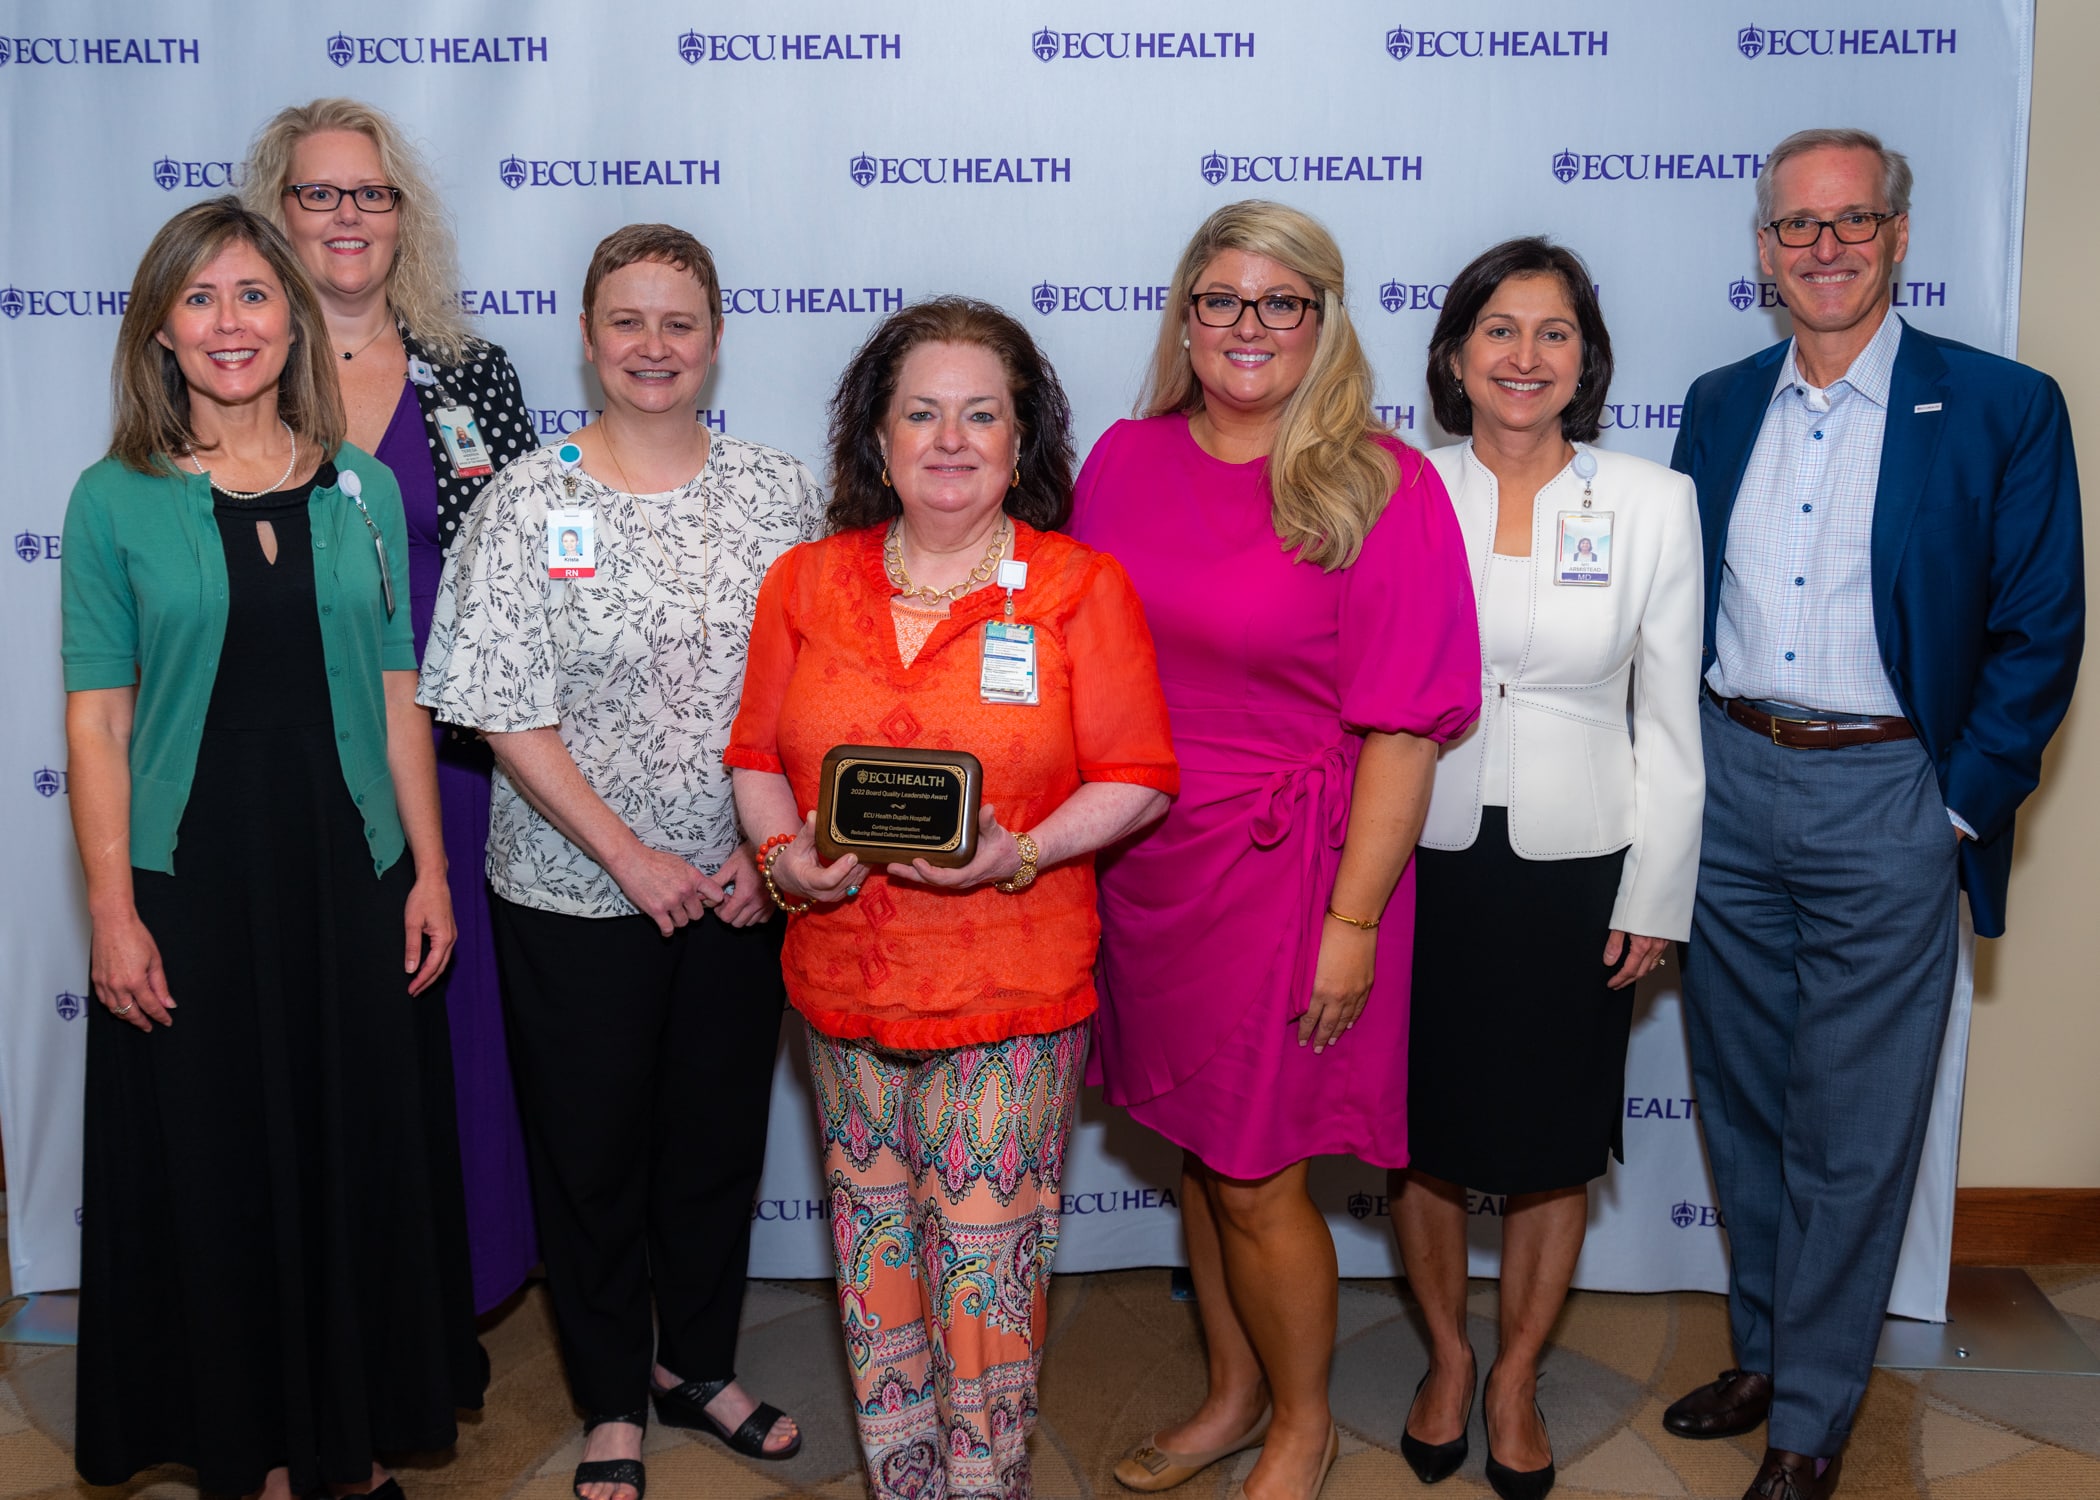 Team members from ECU Health Duplin Hospital pose for a photo after earning a Board Quality Leadership Award.